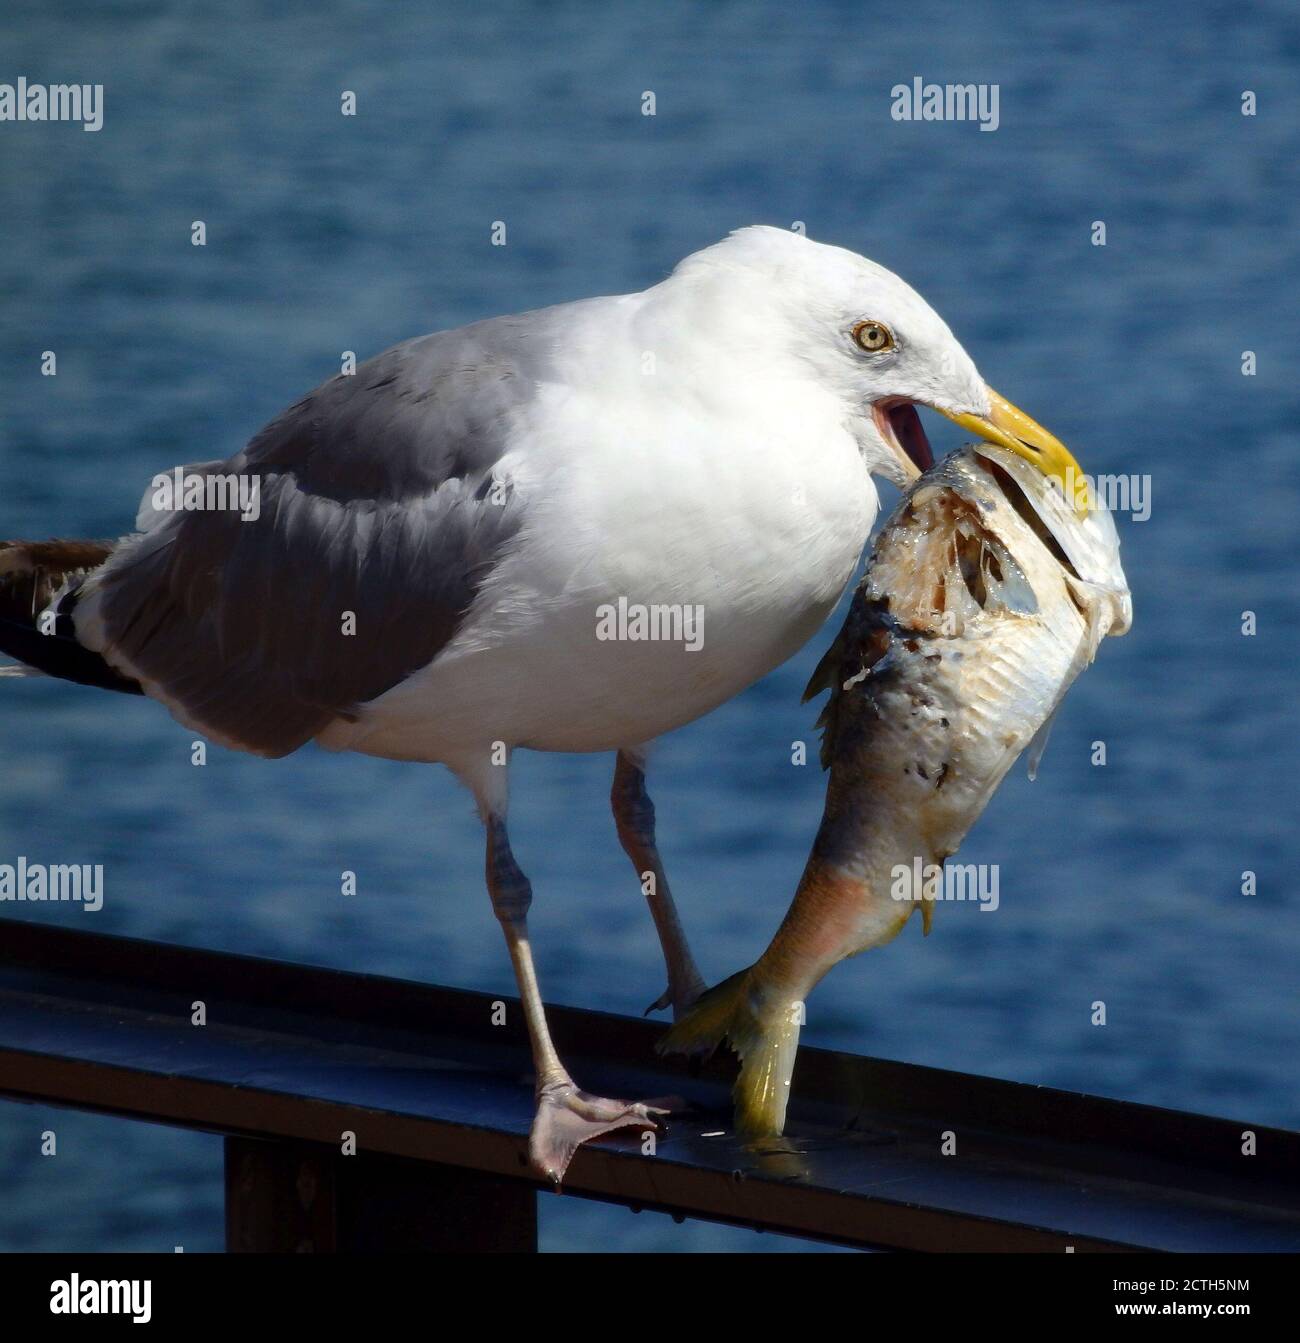 A seagull eating a fish, New York City, USA Stock Photo